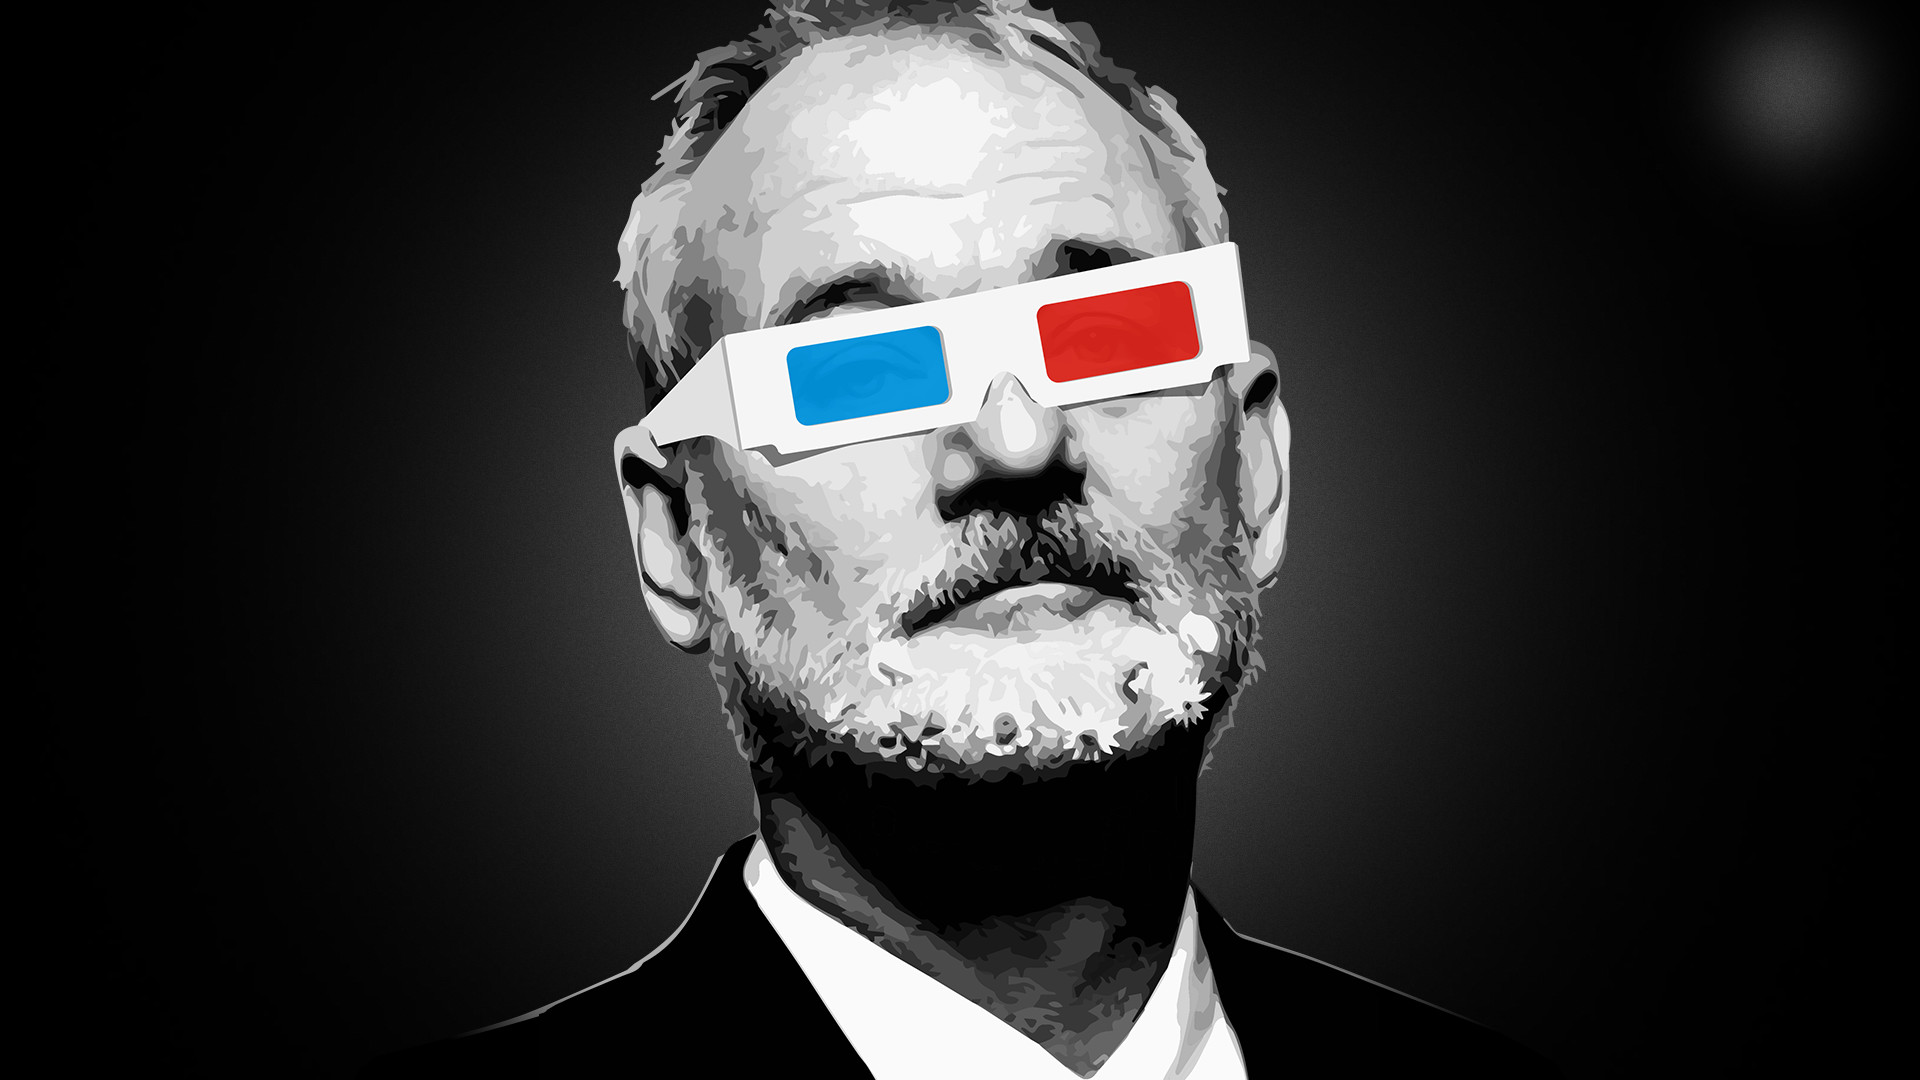 1920x1080 as requestedAs requested, Bill Murray (in 3D glasses) theme.